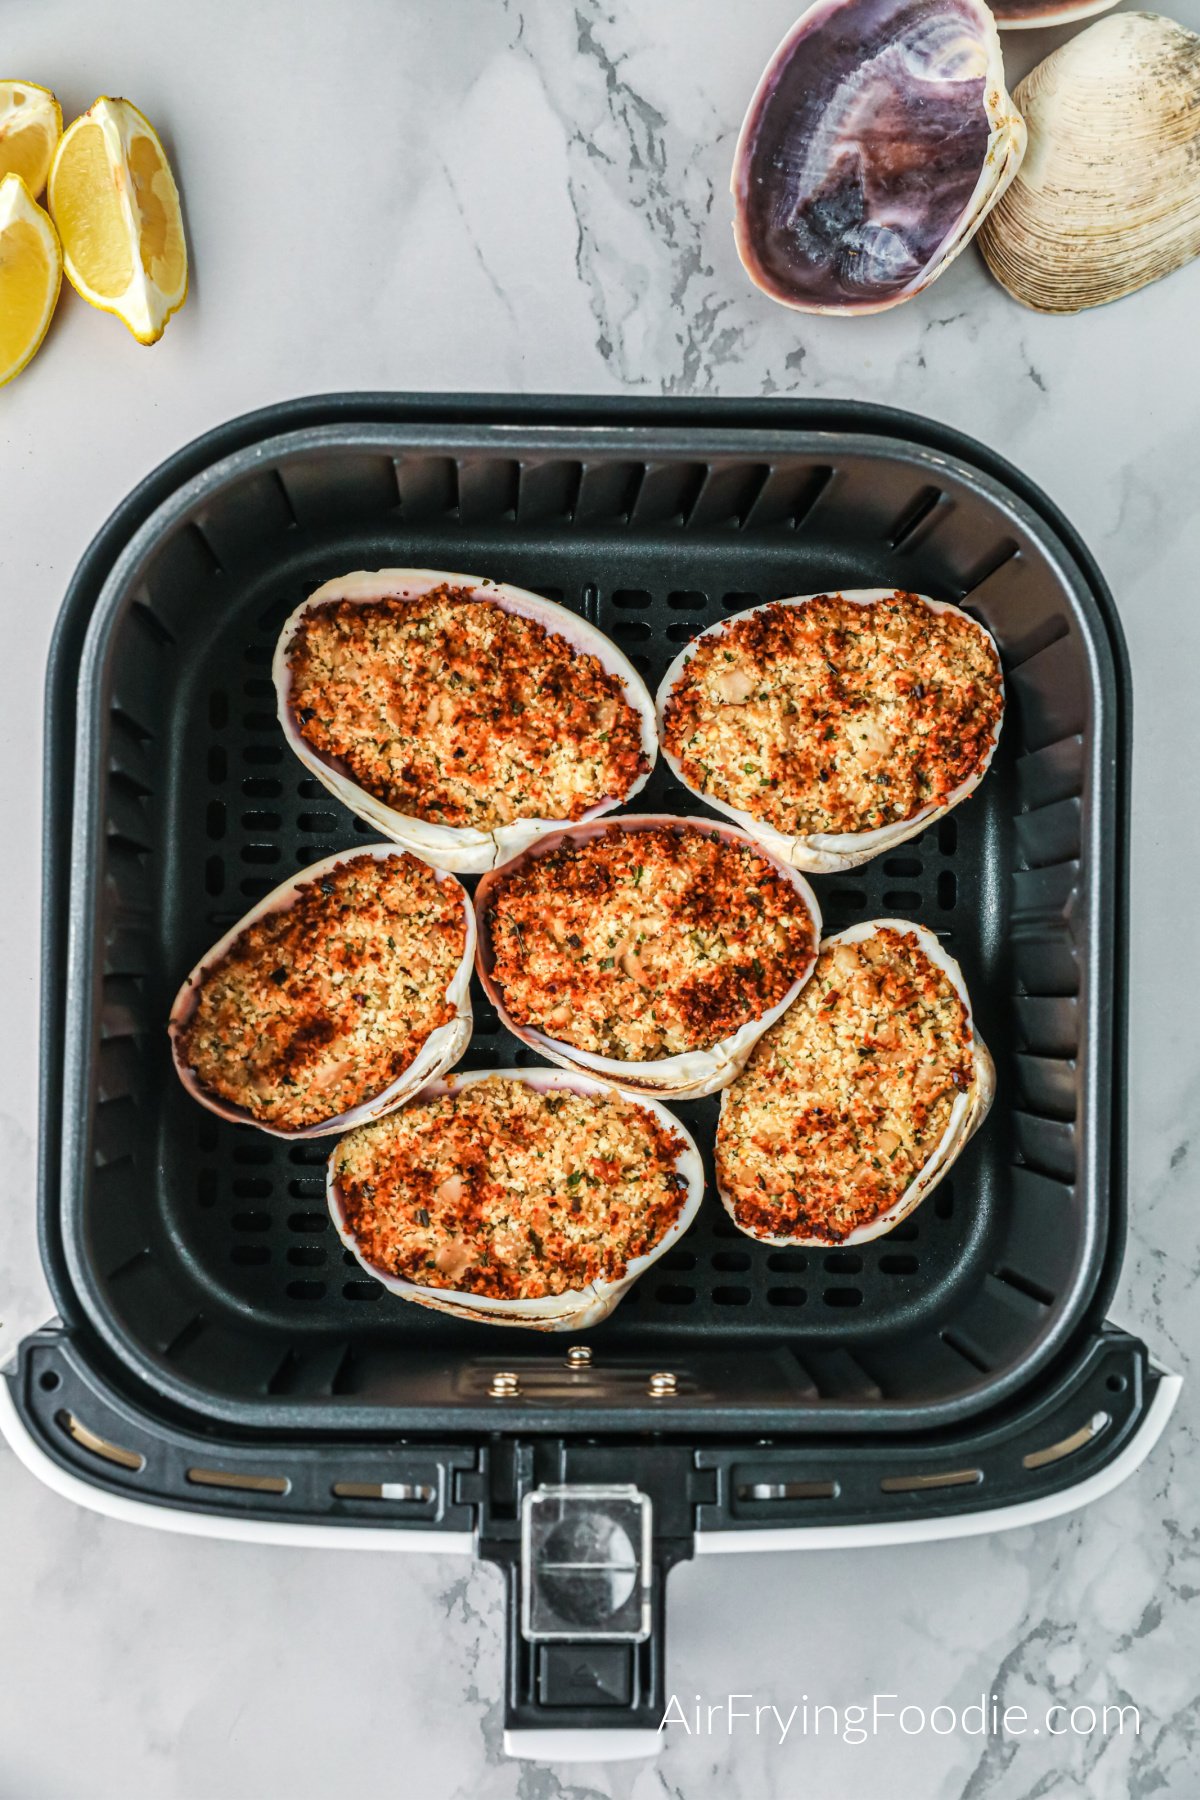 Golden brown stuffed clams in the basket of the air fryer.